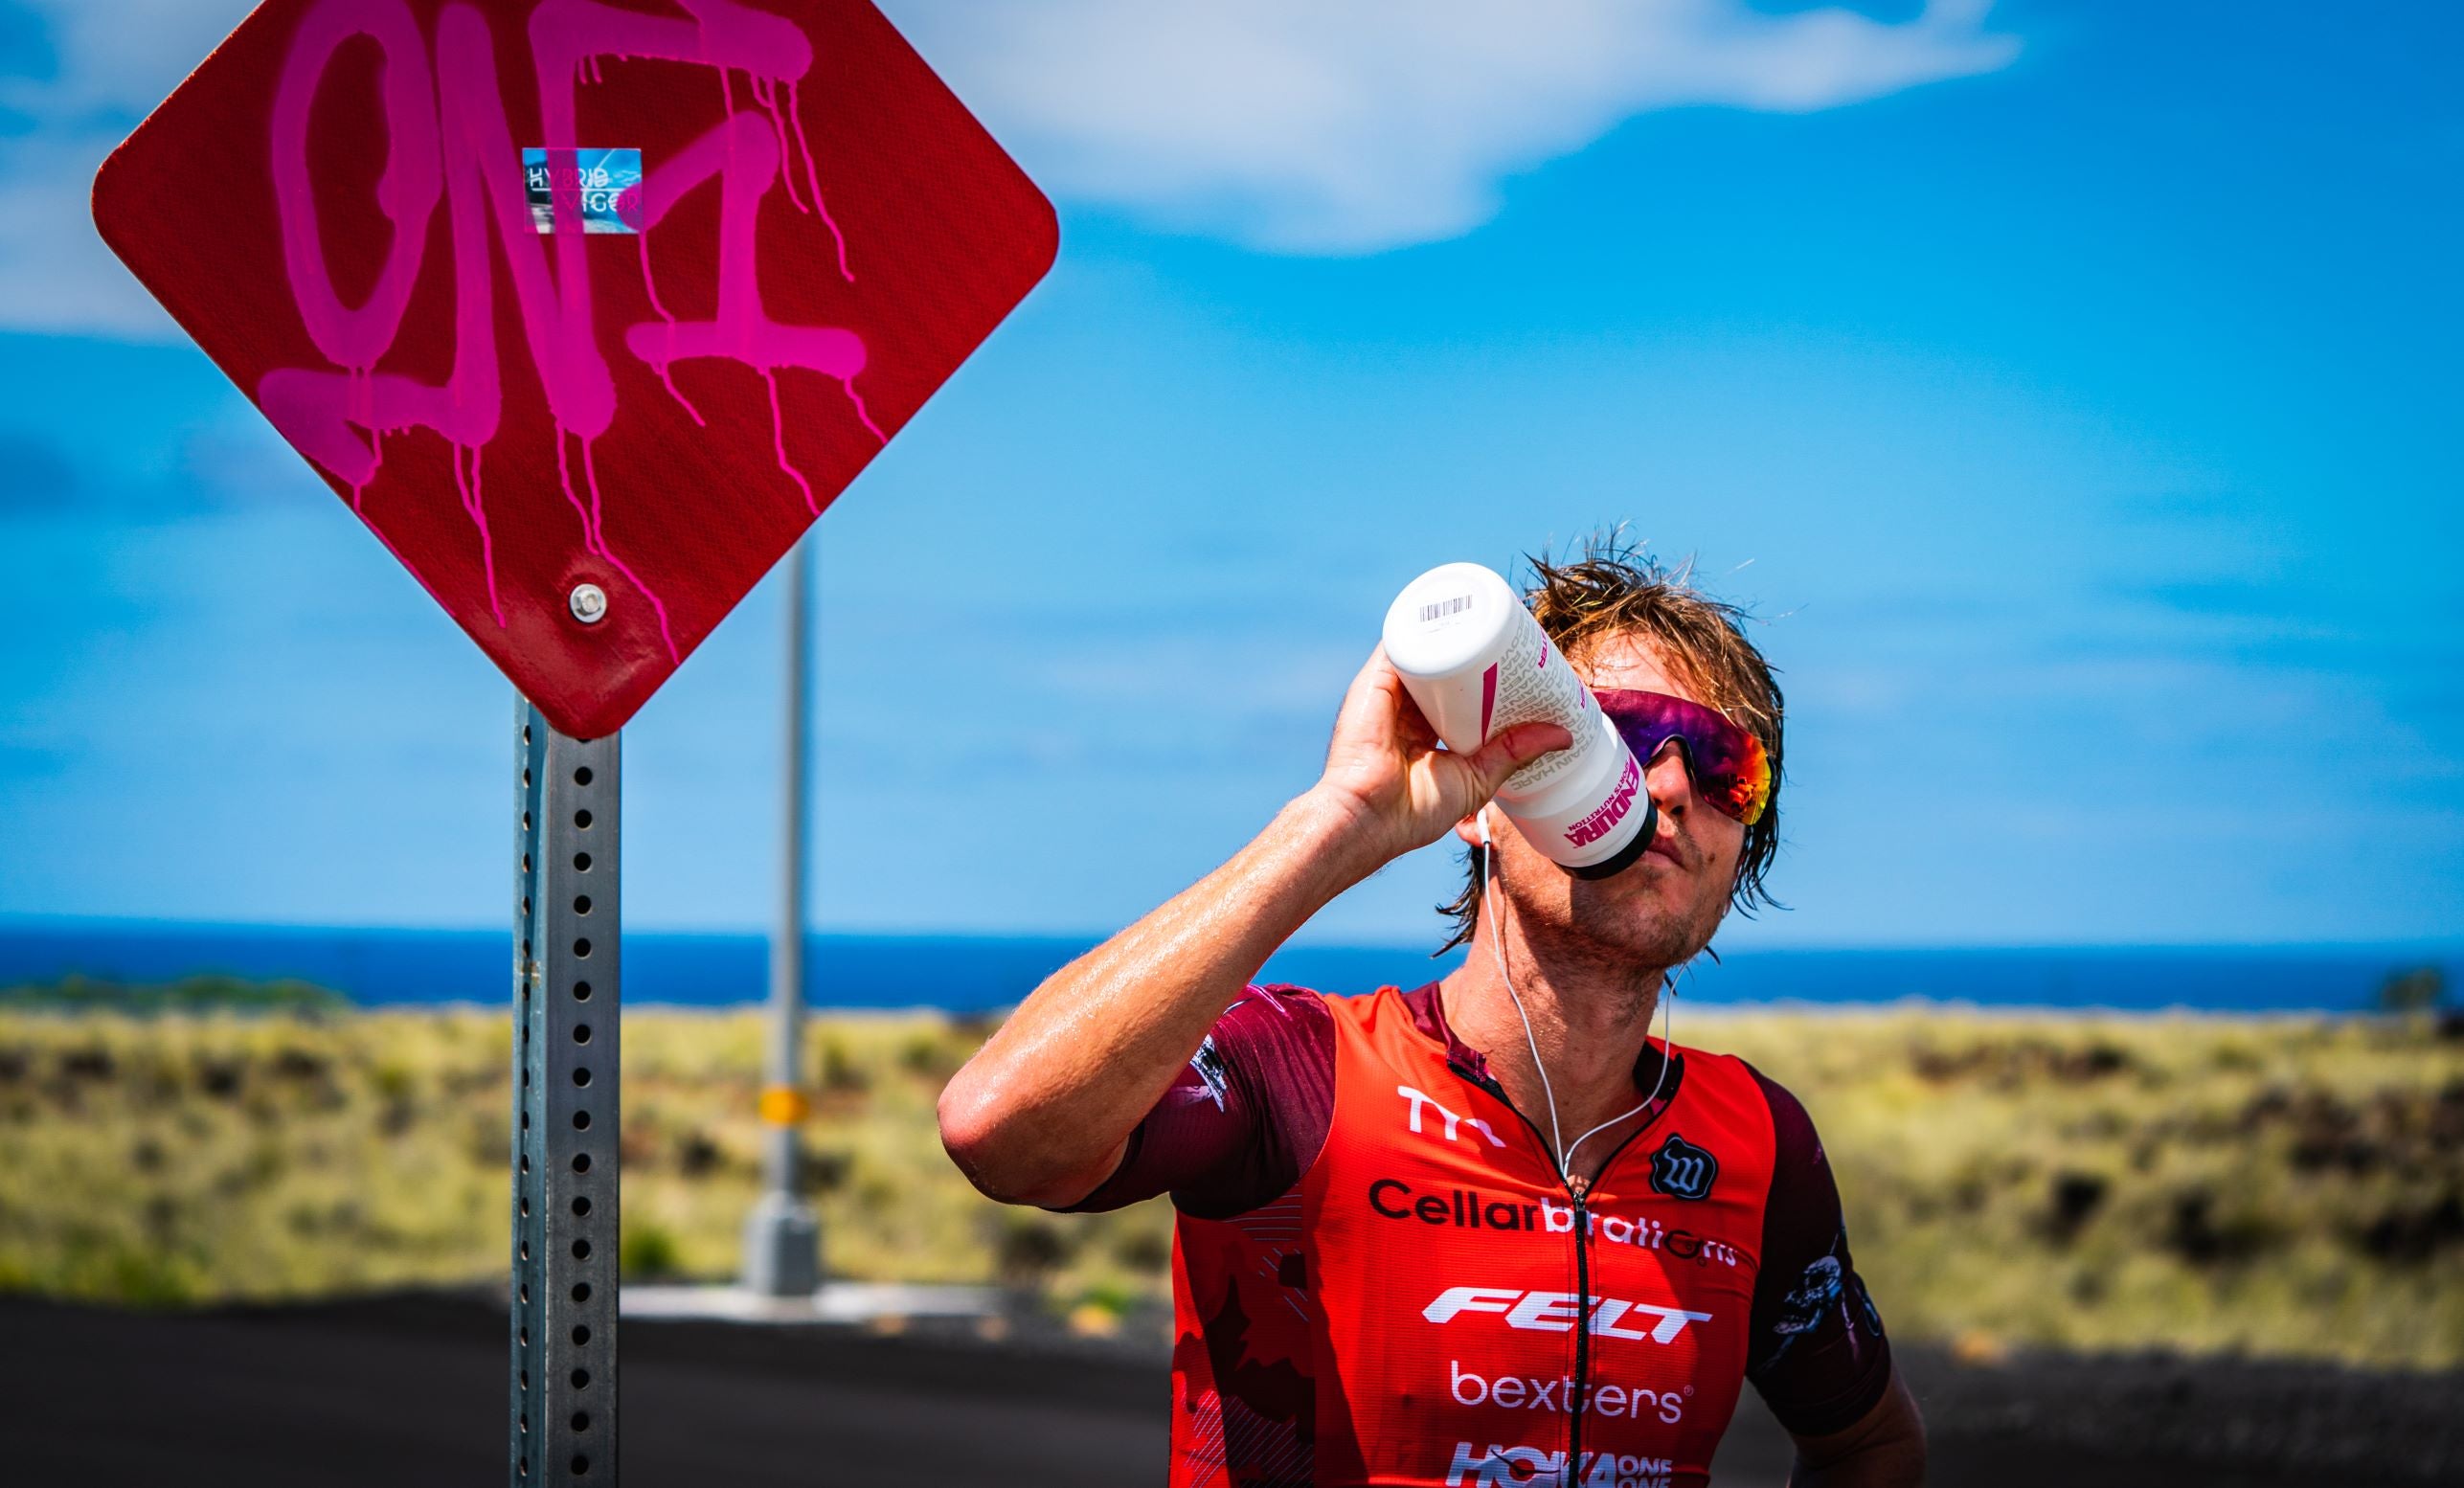 The leadup Up To The Biggest Race in Triathlon with Josh Amberger